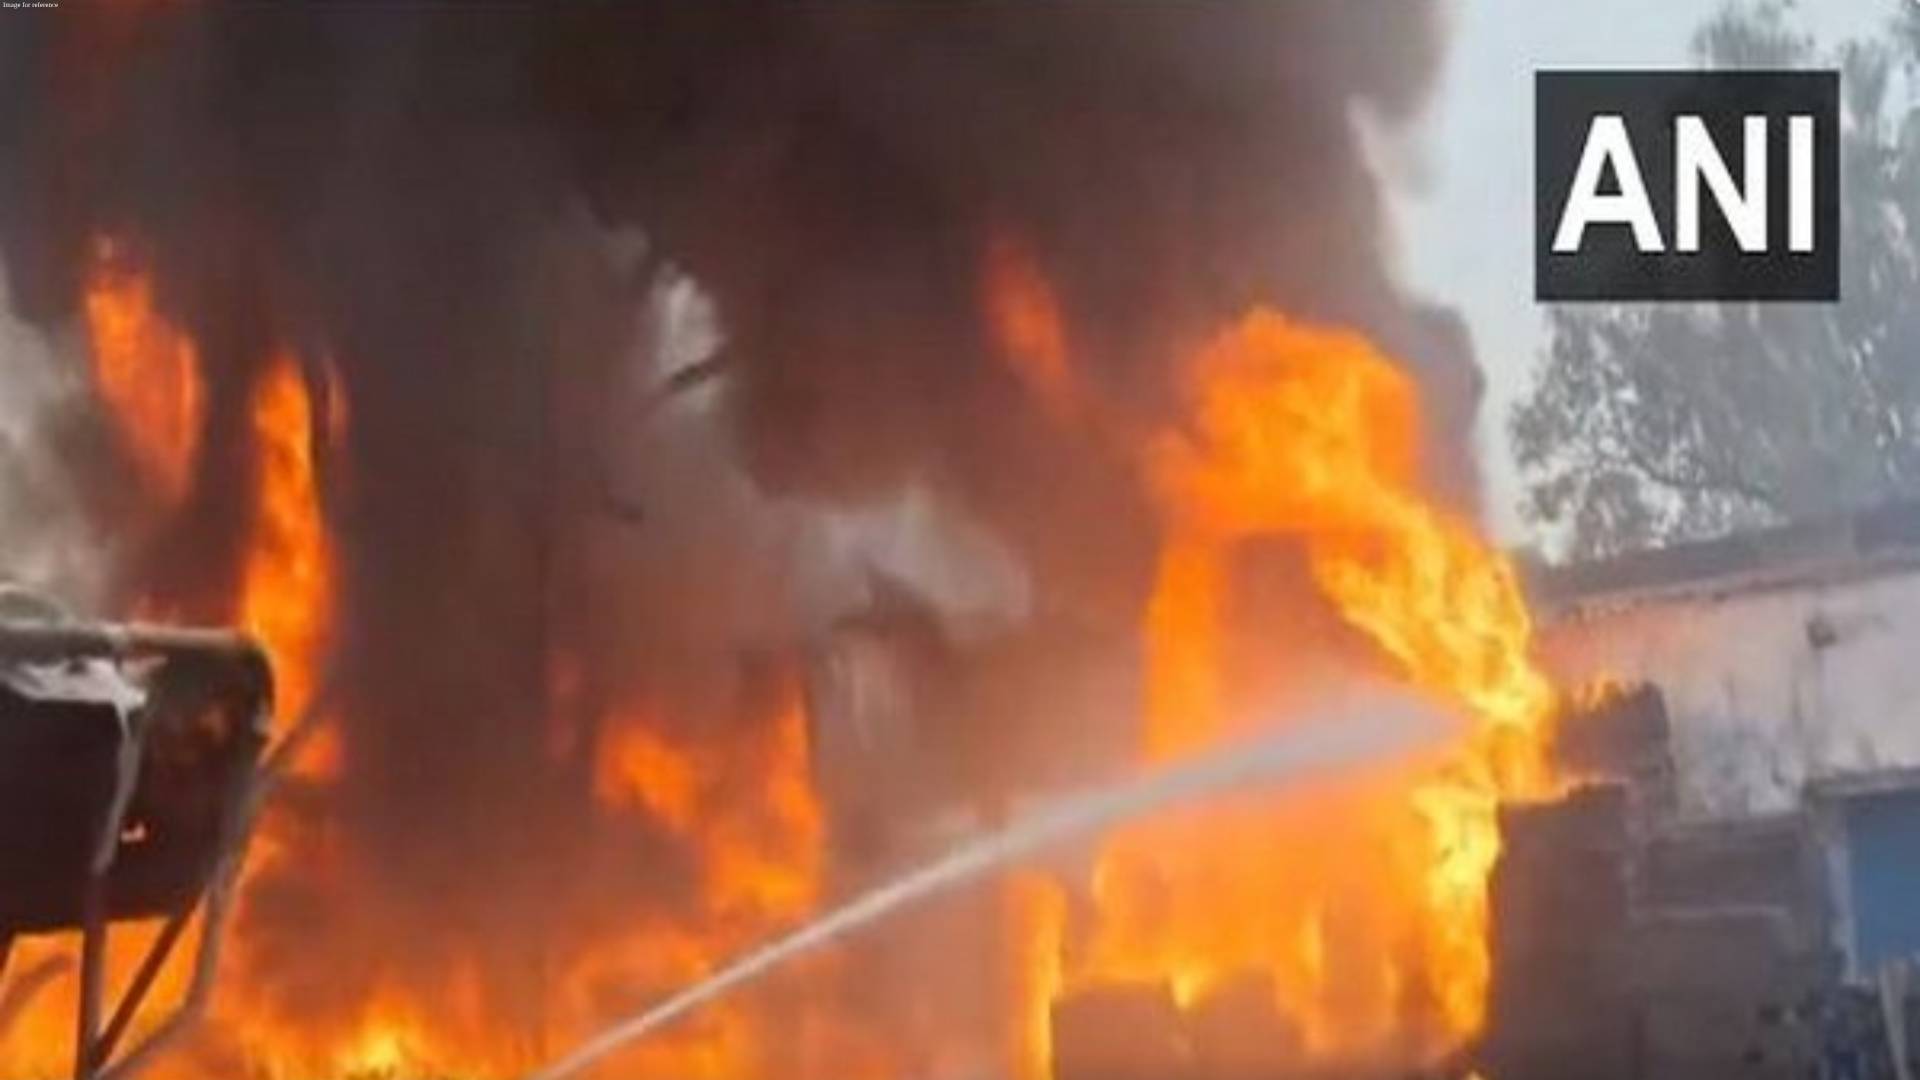 Jharkhand: Massive fire breaks out at godown in Jamshedpur